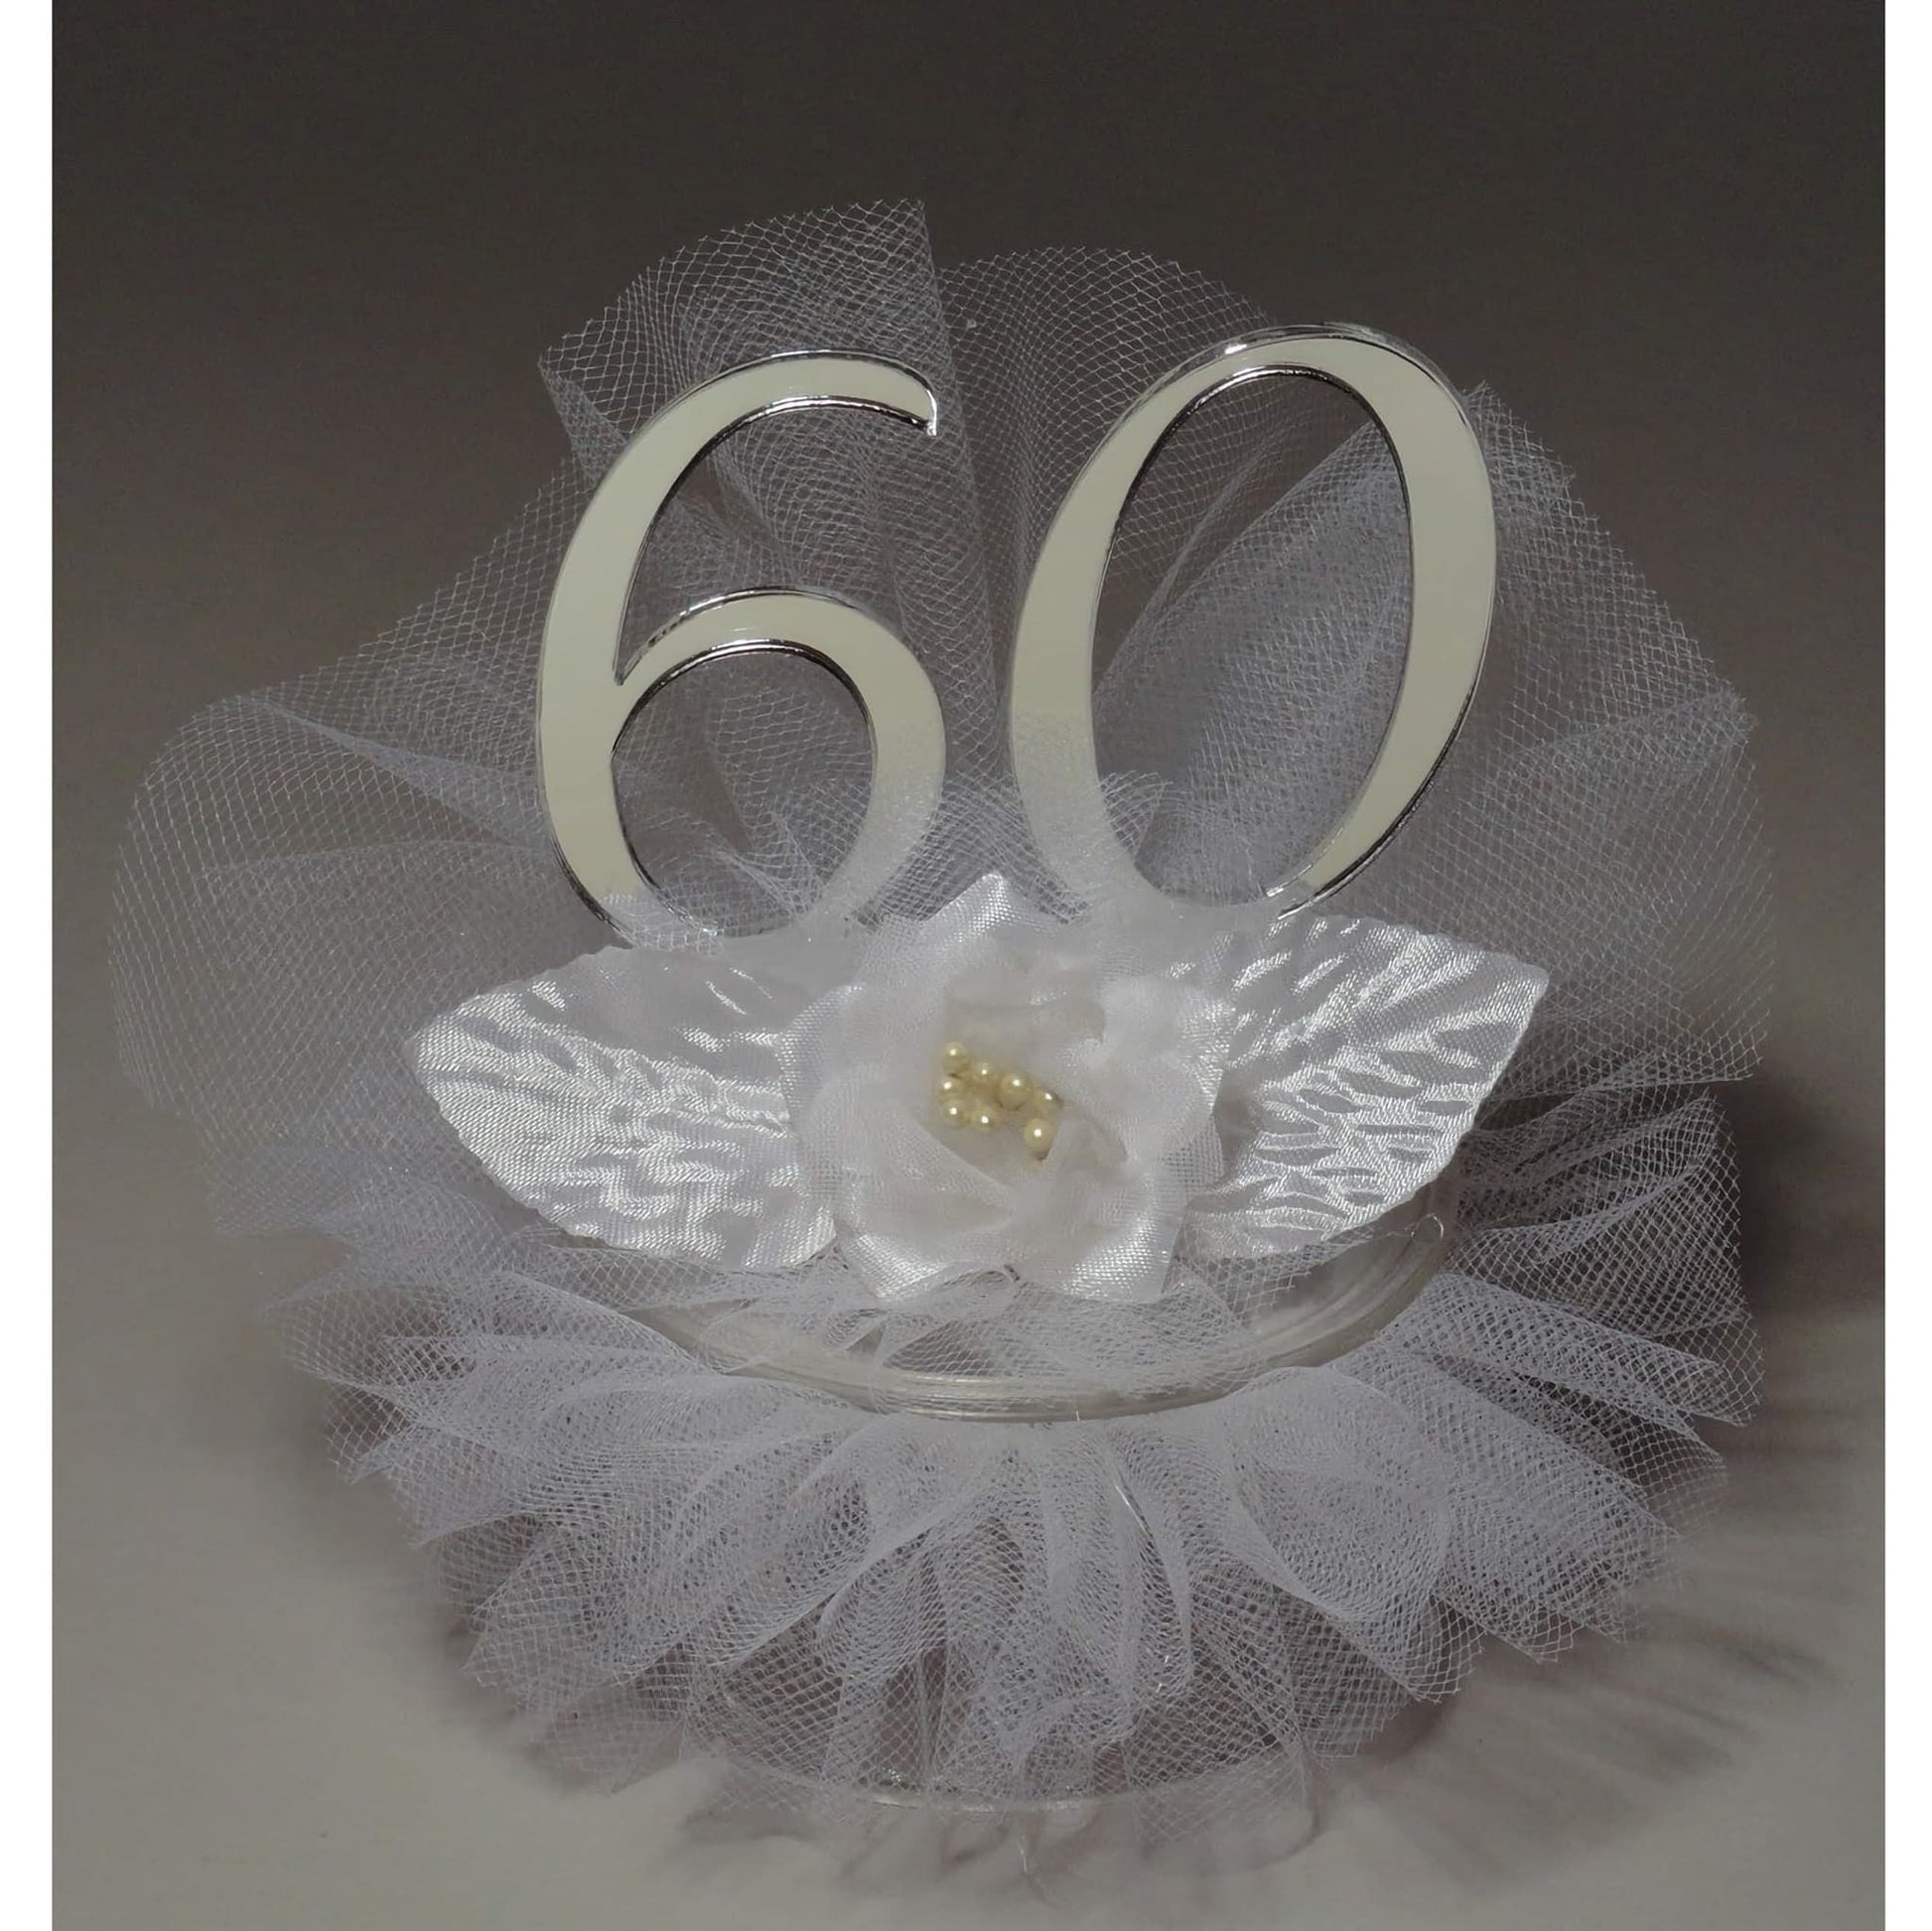 Silver 60th-anniversary cake topper, featuring stately '60' numerals on a graceful tulle embellished base, an exquisite decoration for commemorating a diamond anniversary milestone.